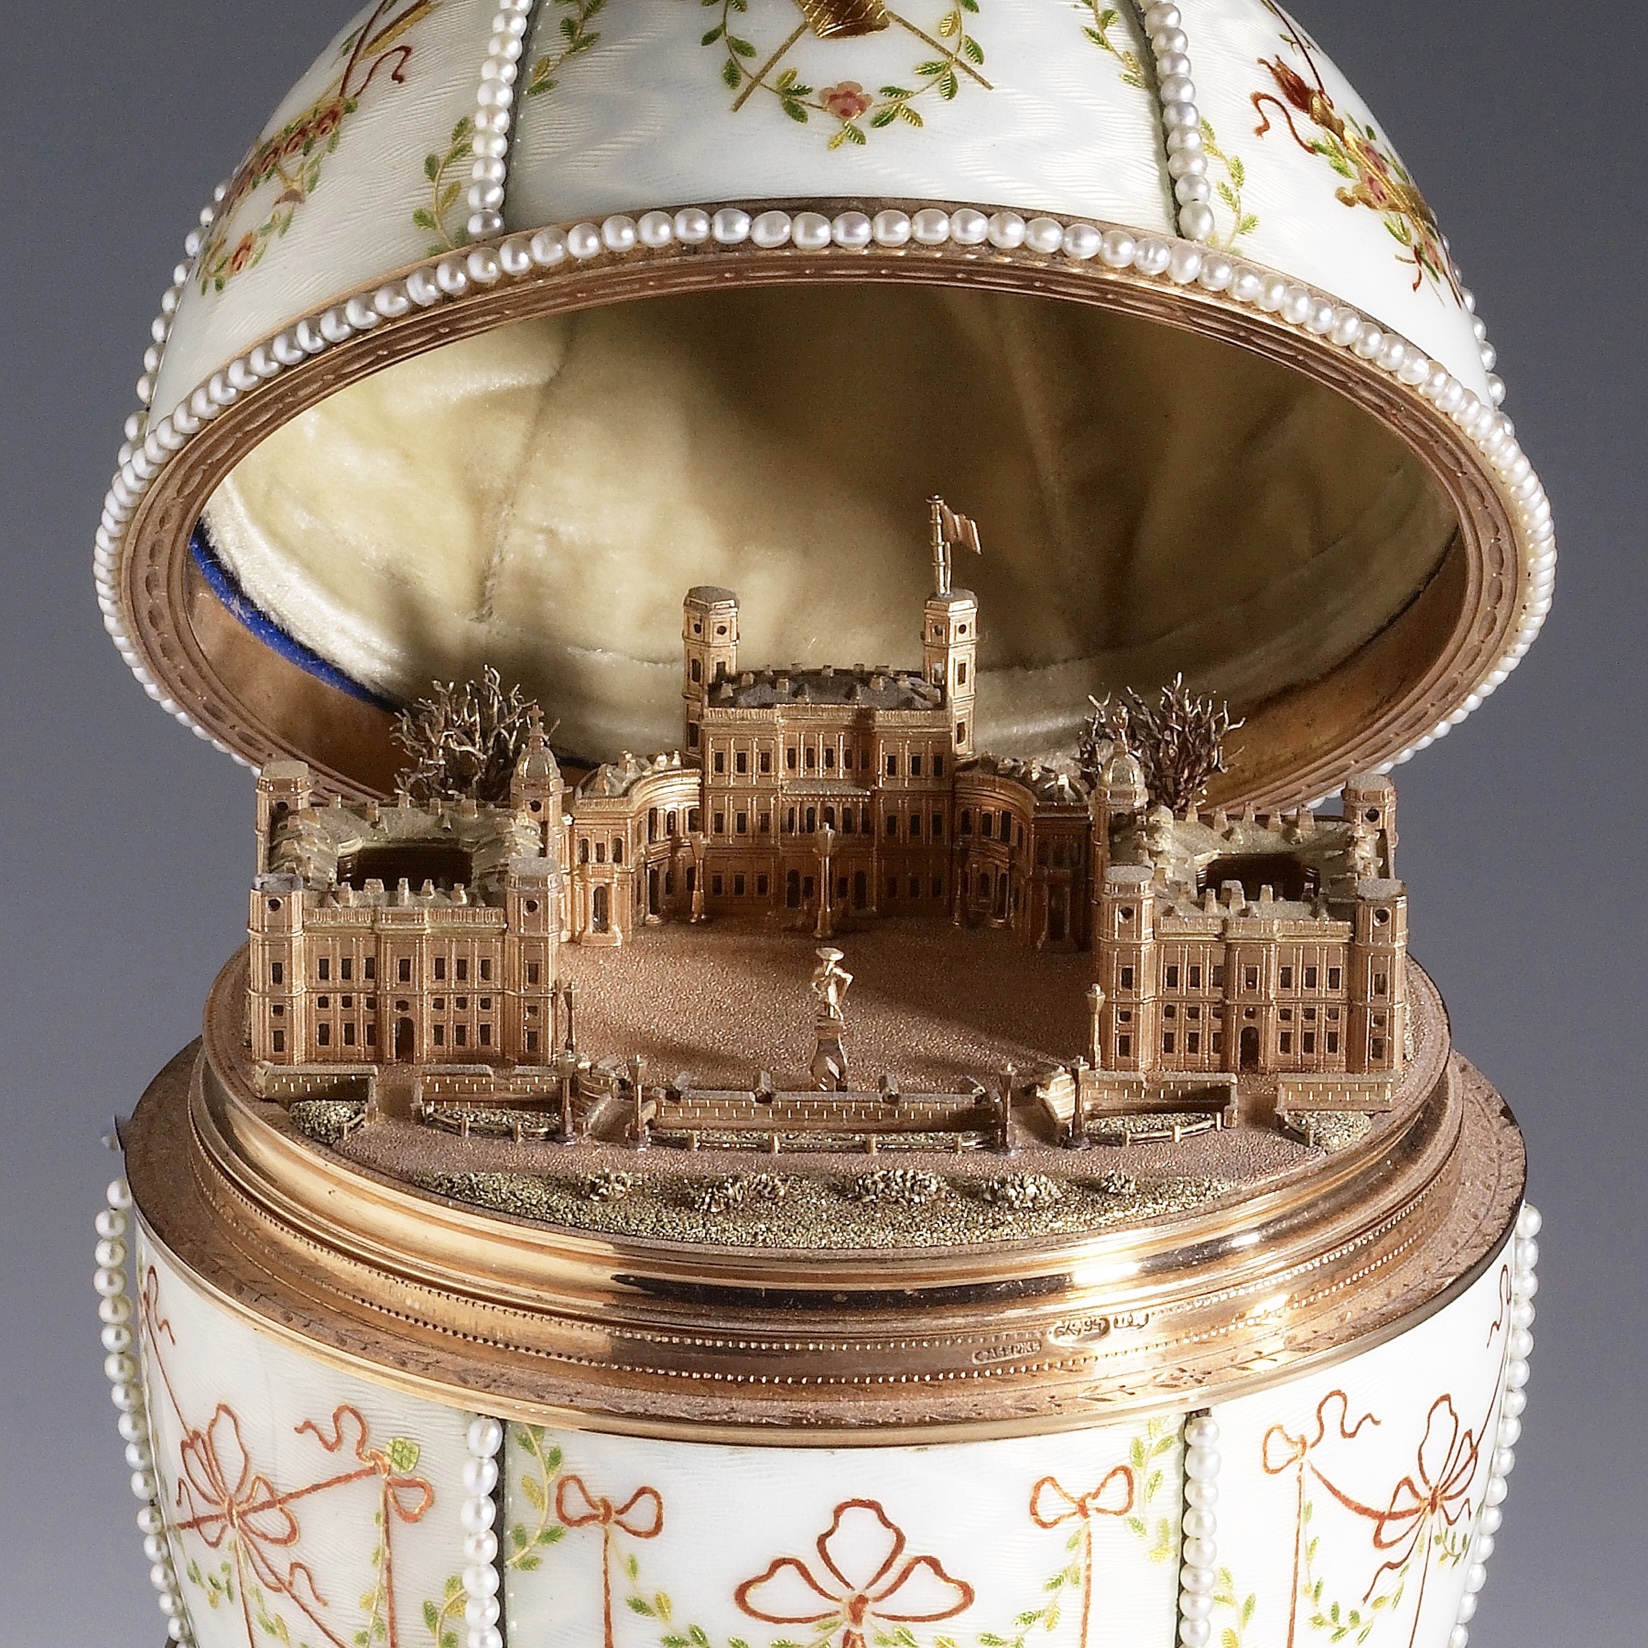 Fabergé And The Russian Crafts Tradition:
An Empire’s Legacy

Gatchina Palace Egg
House of Fabergé (Russian, est. 1842) (Manufacturer)
Mikhail Perkhin (Russian, 1860-1903) (Workmaster)
Peter Carl Fabergé (1846-1920) (Other)
1901
gold, "en plein" enamel, silver-gilding, portrait diamonds, rock crystal, and seed pearls
(18th and 19th Centuries )

As far back as antiquity, decorated eggs have been given to celebrate the blossoming of nature in the springtime. The tradition was taken up by the Church to celebrate the resurrection of Jesus Christ at Easter.

In 1885, to celebrate the 20th anniversary of their engagement, Tsar Alexander III had the idea of giving an Easter egg to his wife Marie Fedorovna. This was the first in a long tradition, perpetuated by his son Nicholas II, who, after Alexander III's death, continued to give them to his mother and his wife.

To make these eggs, the Tsar called on the Fabergé family. This family of Huguenots left France in the 17th century, following the revocation of the Edict of Nantes. The Fabergés settled in St. Petersburg in 1842, where they quickly established a successful jewelry house.